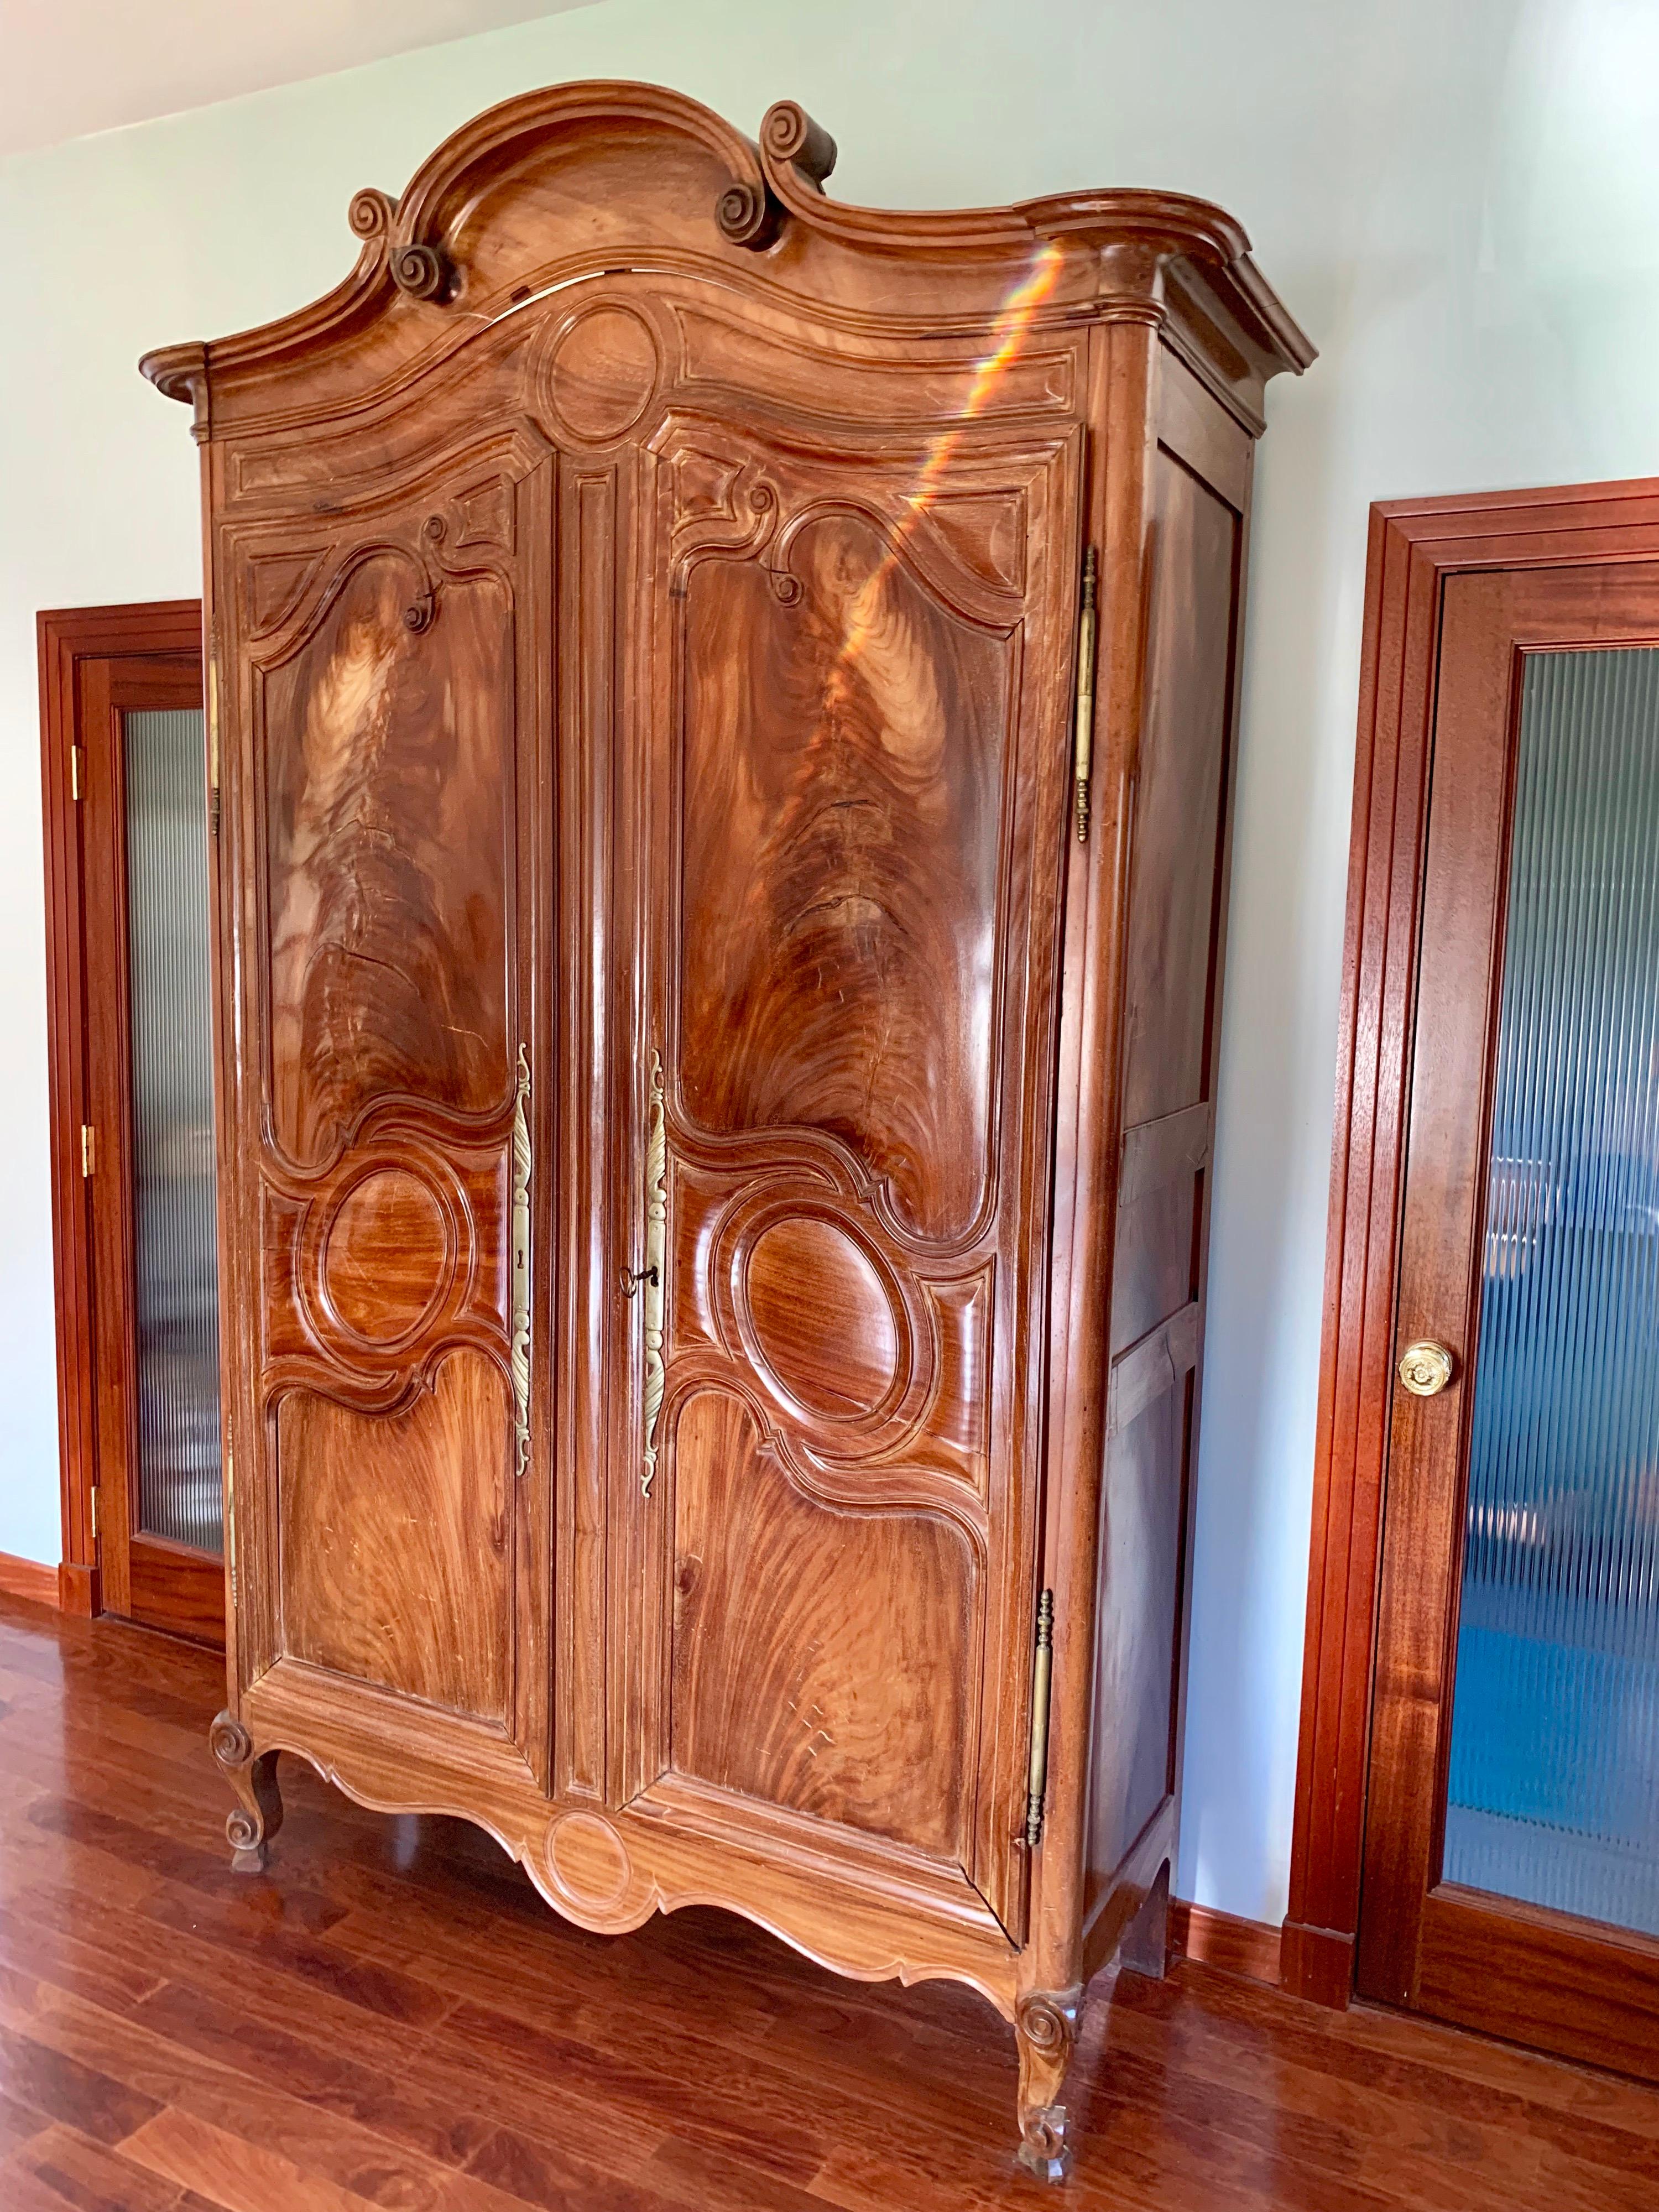 This mid-18th century Louis XV French provincial armoire is made of solid mahogany, which is the rarest of all woods used for this type of furniture.
Most of the time walnut or oak were available to the furniture makers.
Made in France, circa